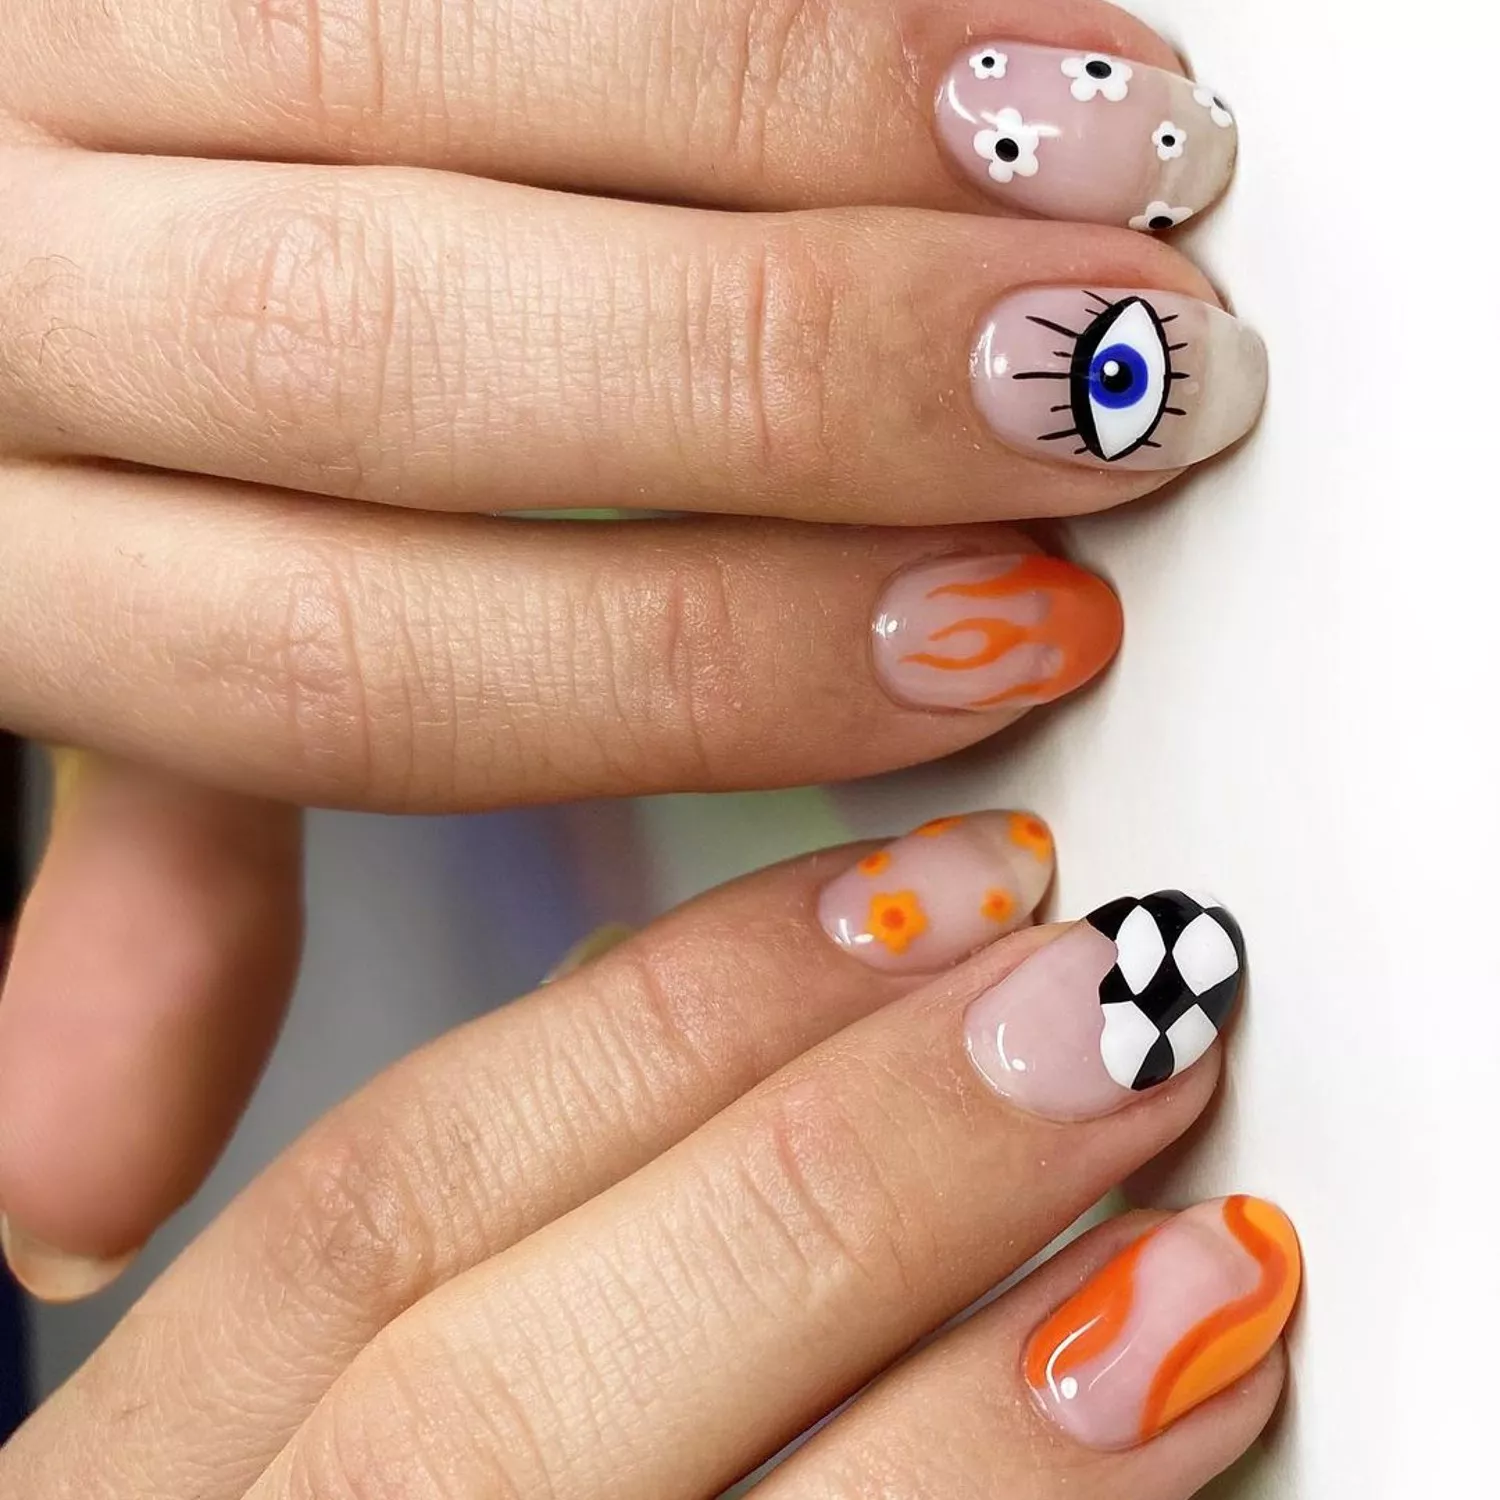 Manicure with white and orange daisy, evil eye, flame, and abstract checkerboard designs